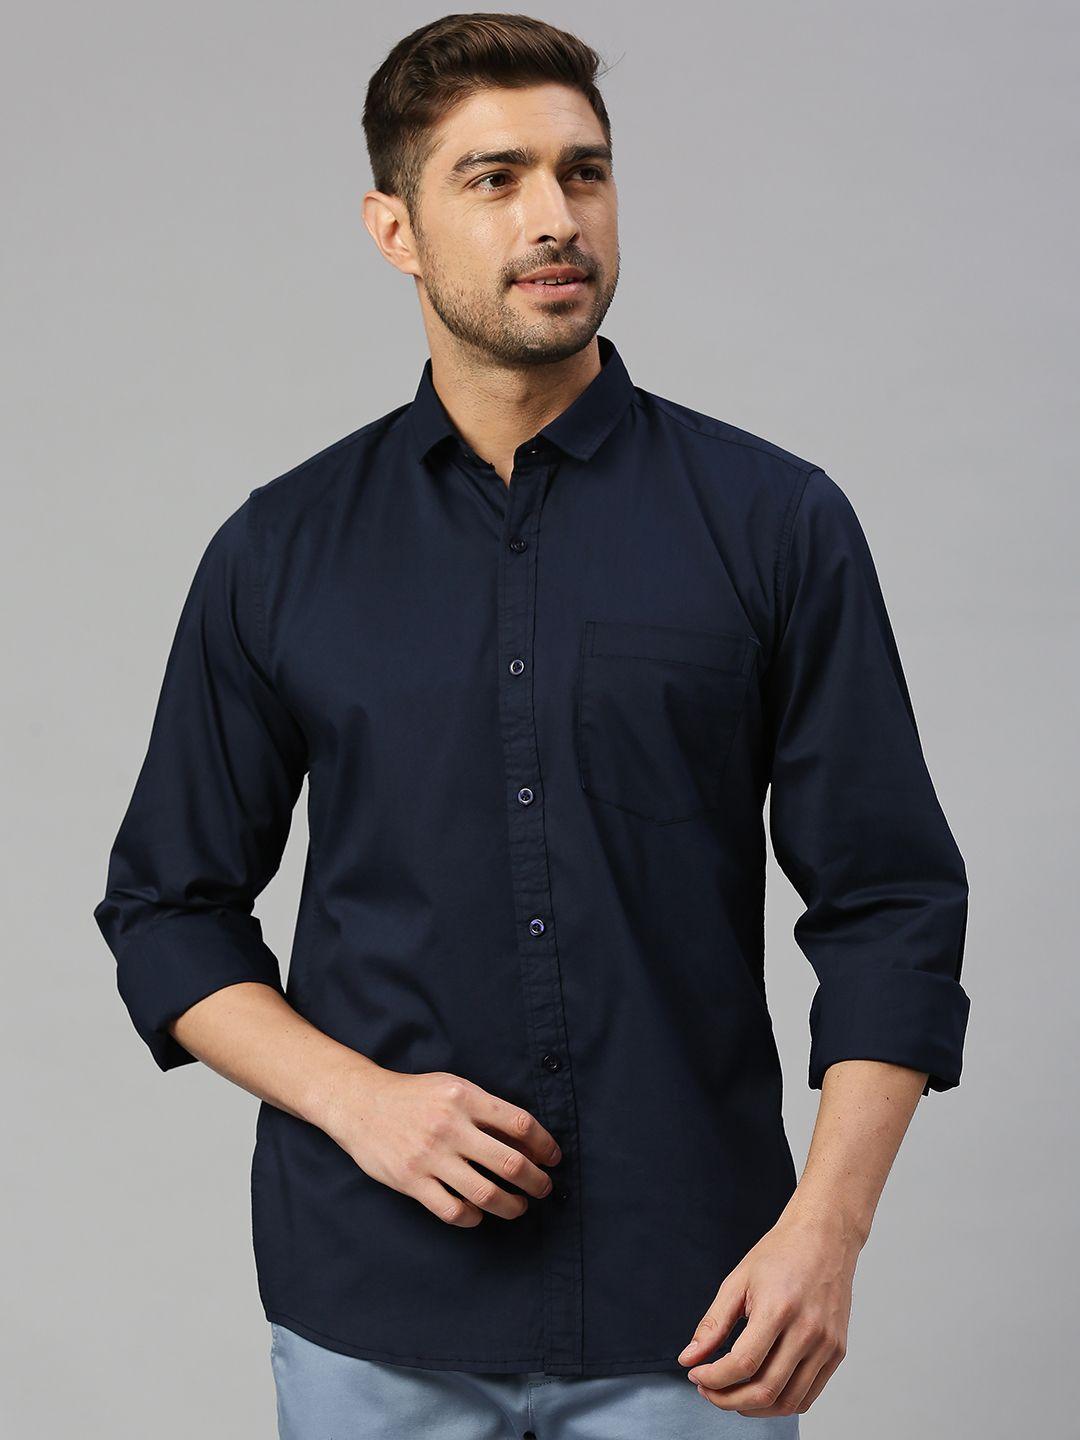 mast & harbour navy blue spread collar slim fit casual shirt